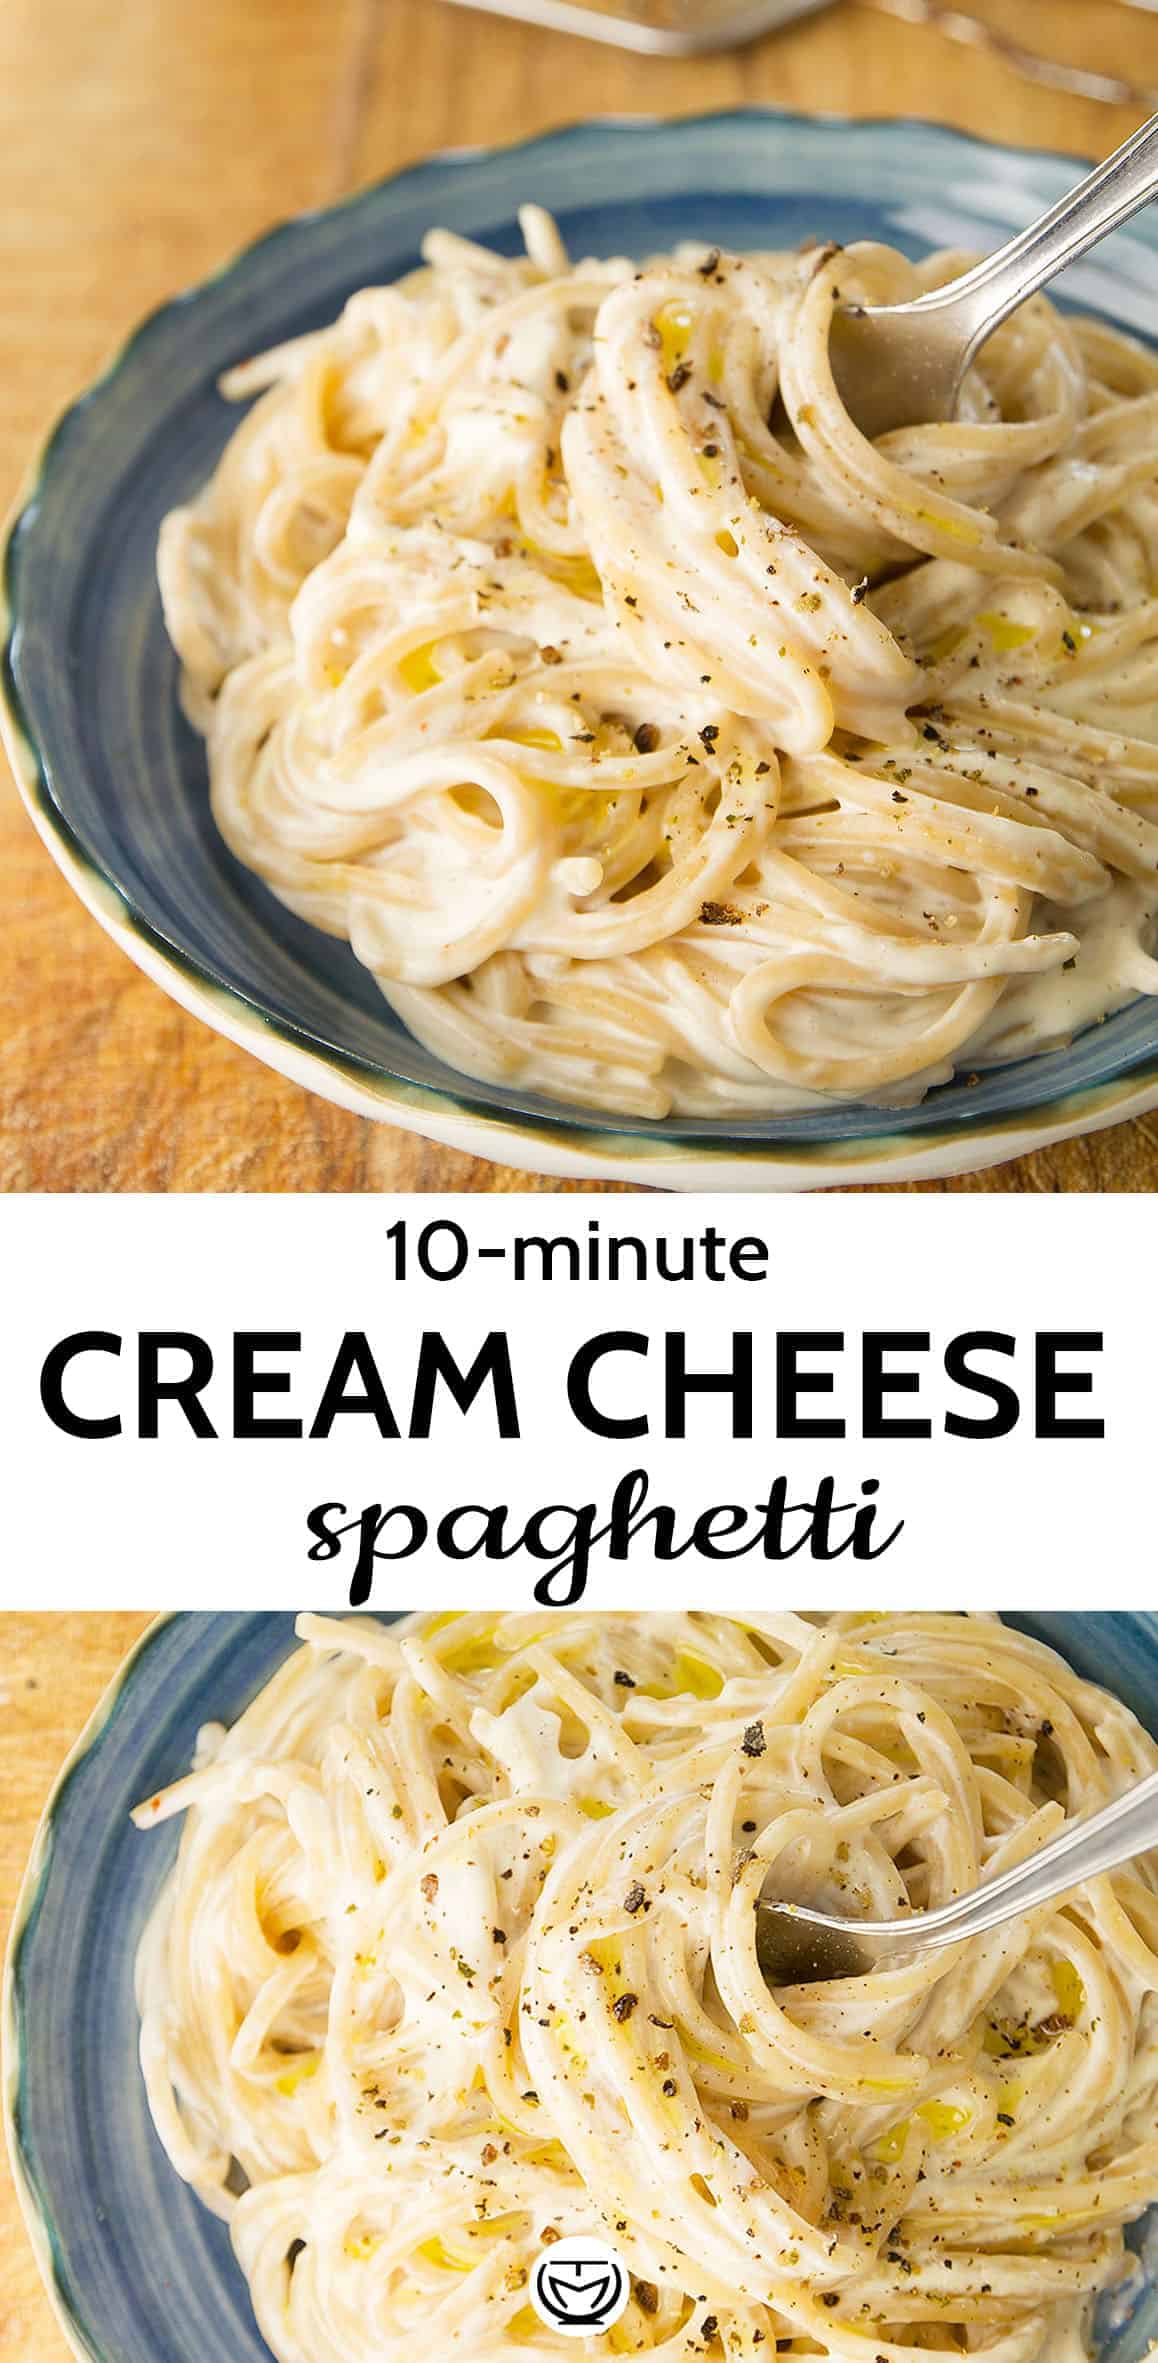 This is the creamy, filling and cozy cream cheese pasta makes everybody happy, perfect for any midweek carb cravings. Plus, it's budget-friendly and ready in a flash! #pastarecipes #cheapmeals #cheapdinners #spaghettirecipes #10minutemeals #quickandeasydinnerrecipes